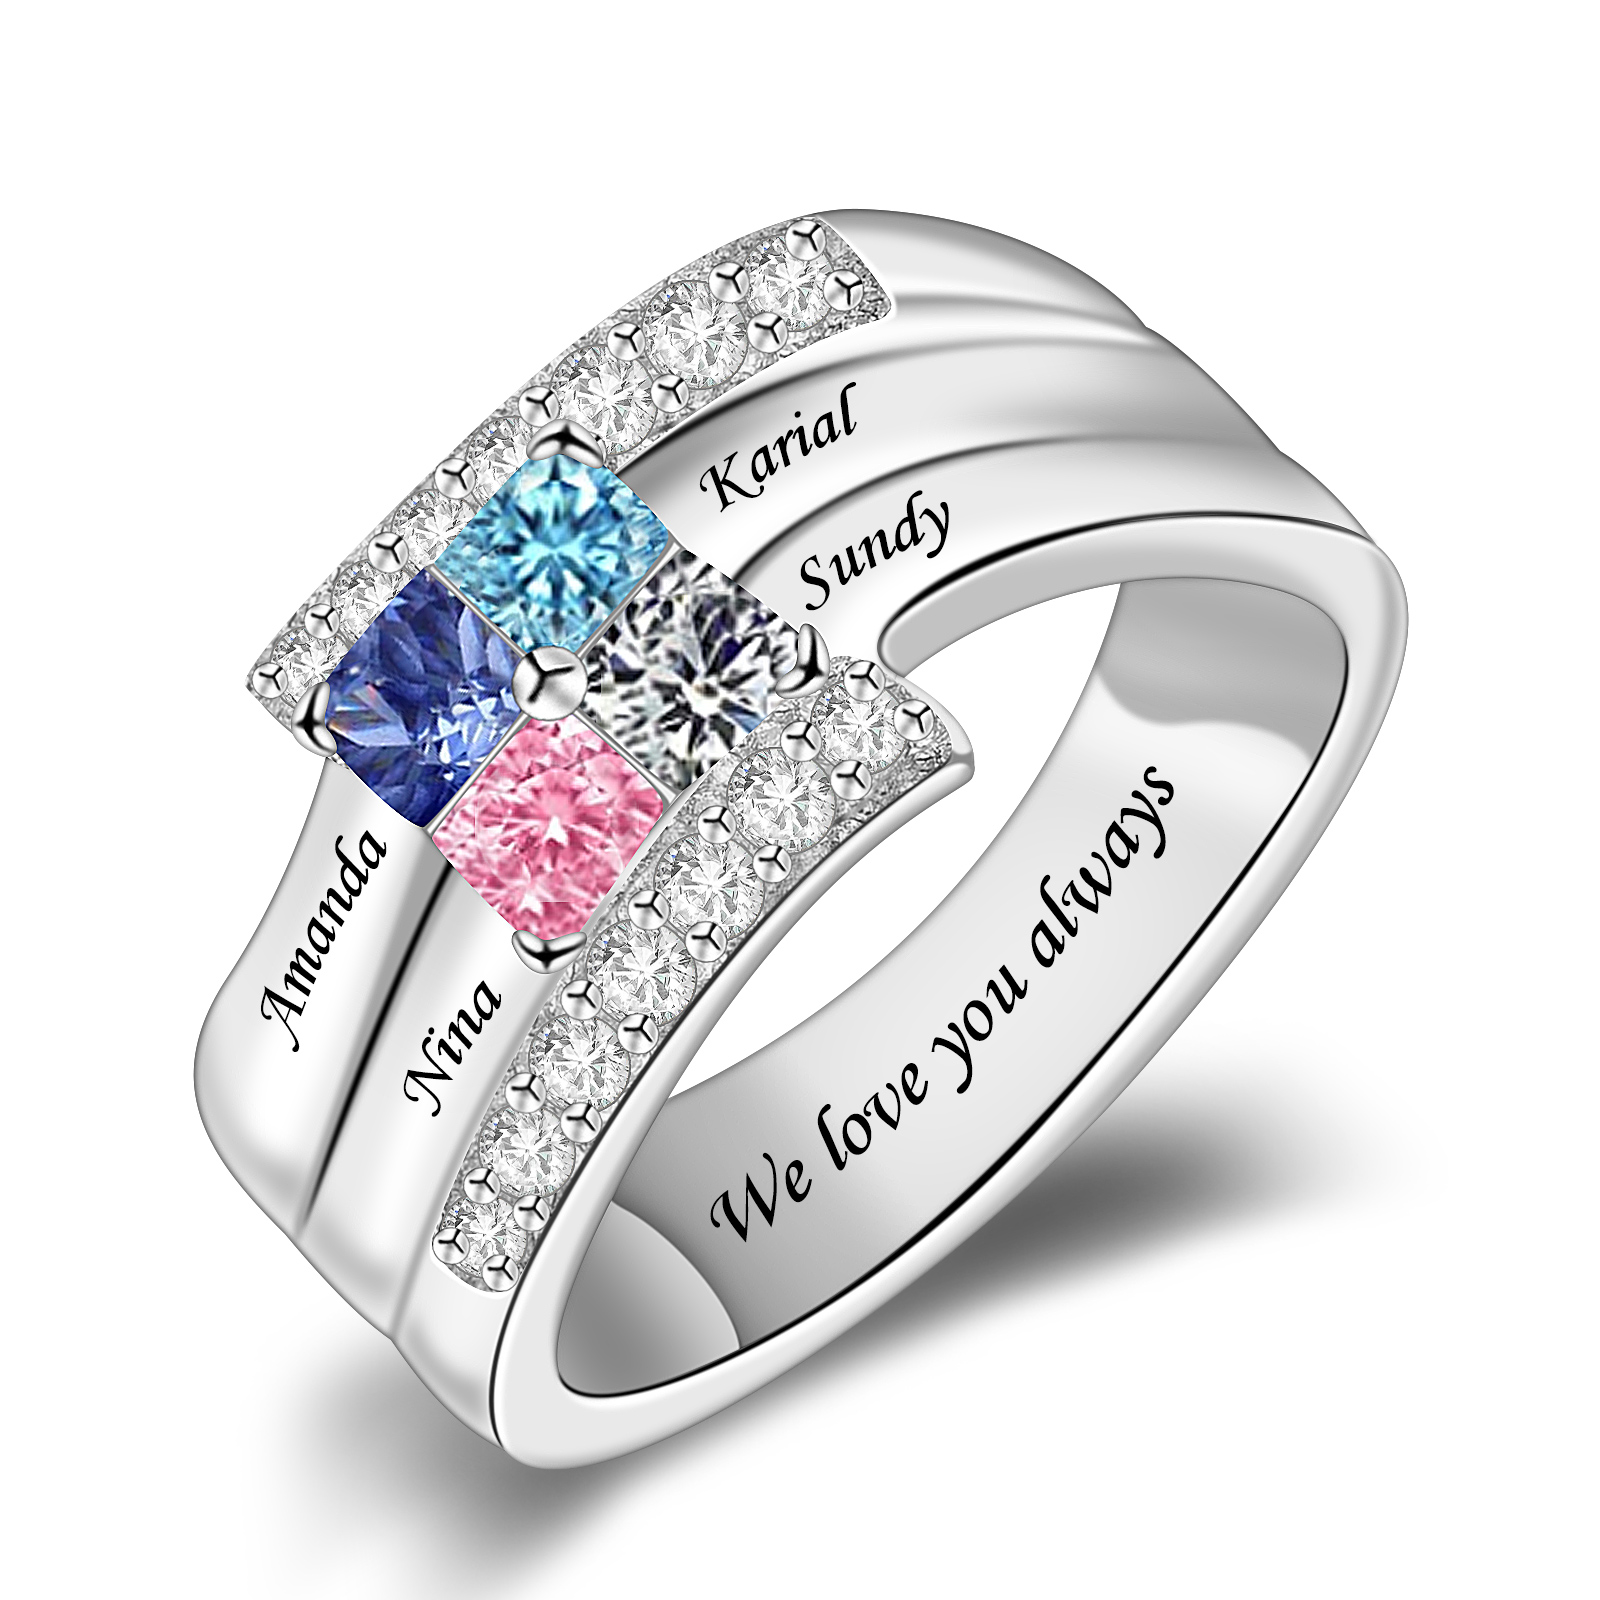 R5-1-4 Personalized Mothers Ring Birthstone and Engraved Name (1-9 Stones)